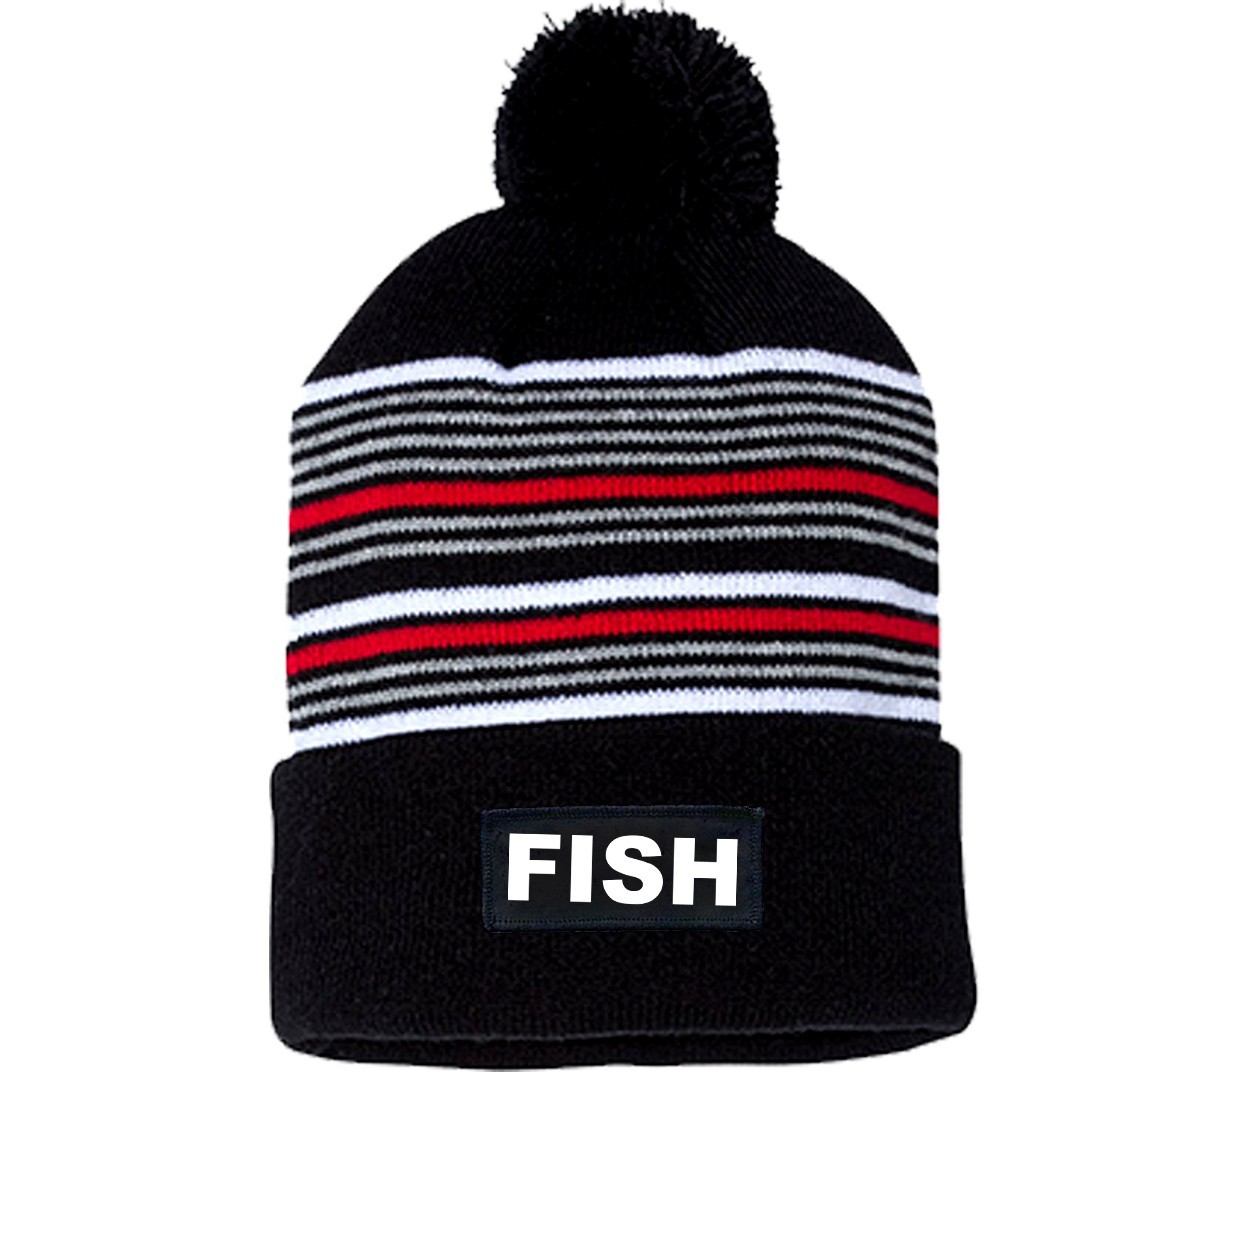 Fish Brand Logo Night Out Woven Patch Roll Up Pom Knit Beanie Black/ White/ Grey/ Red Beanie (White Logo)